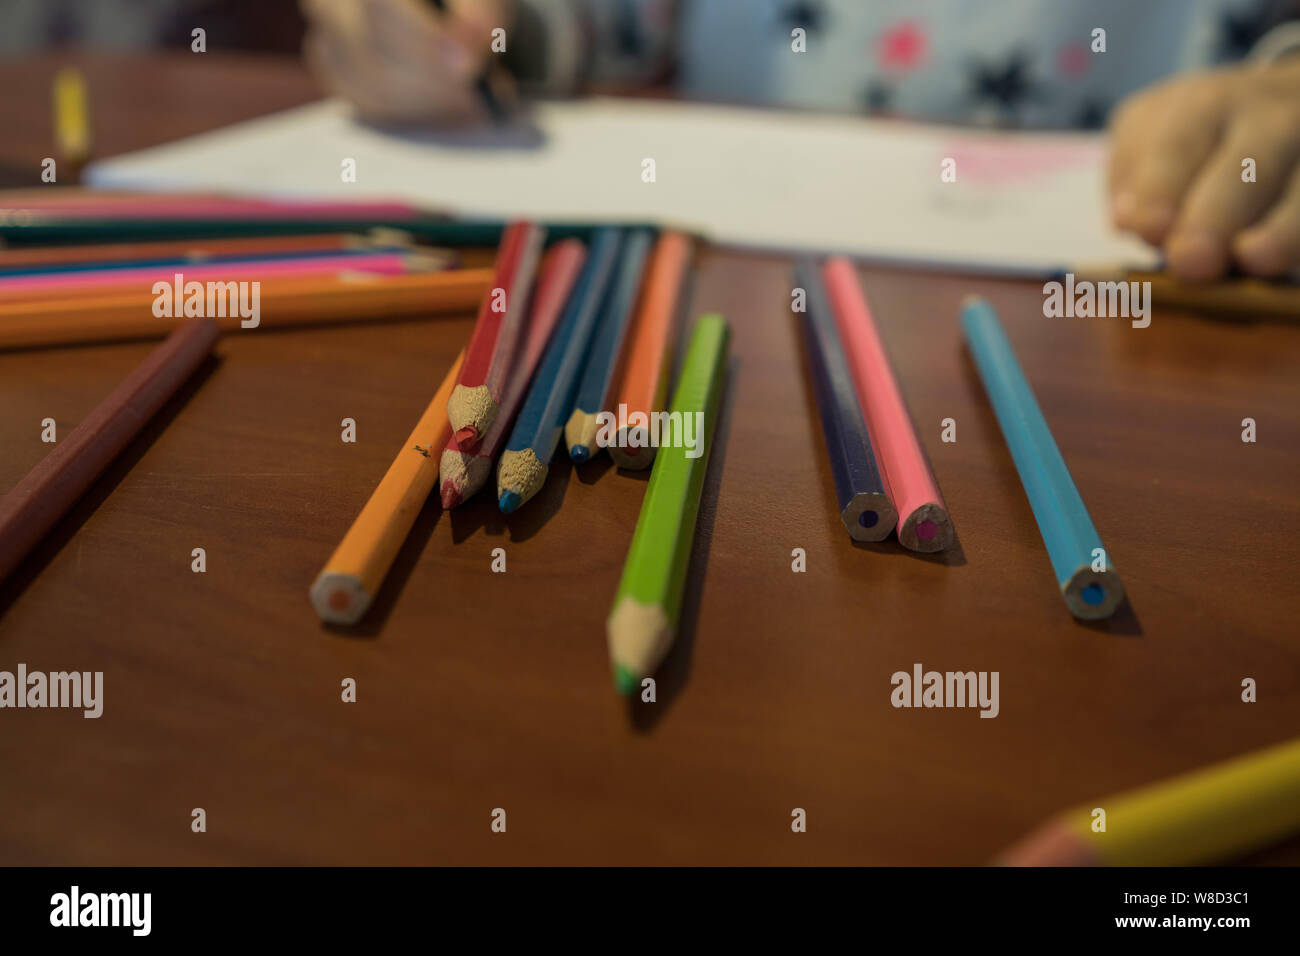 https://c8.alamy.com/comp/W8D3C1/colored-pencils-and-a-sketch-pad-on-a-wooden-table-W8D3C1.jpg